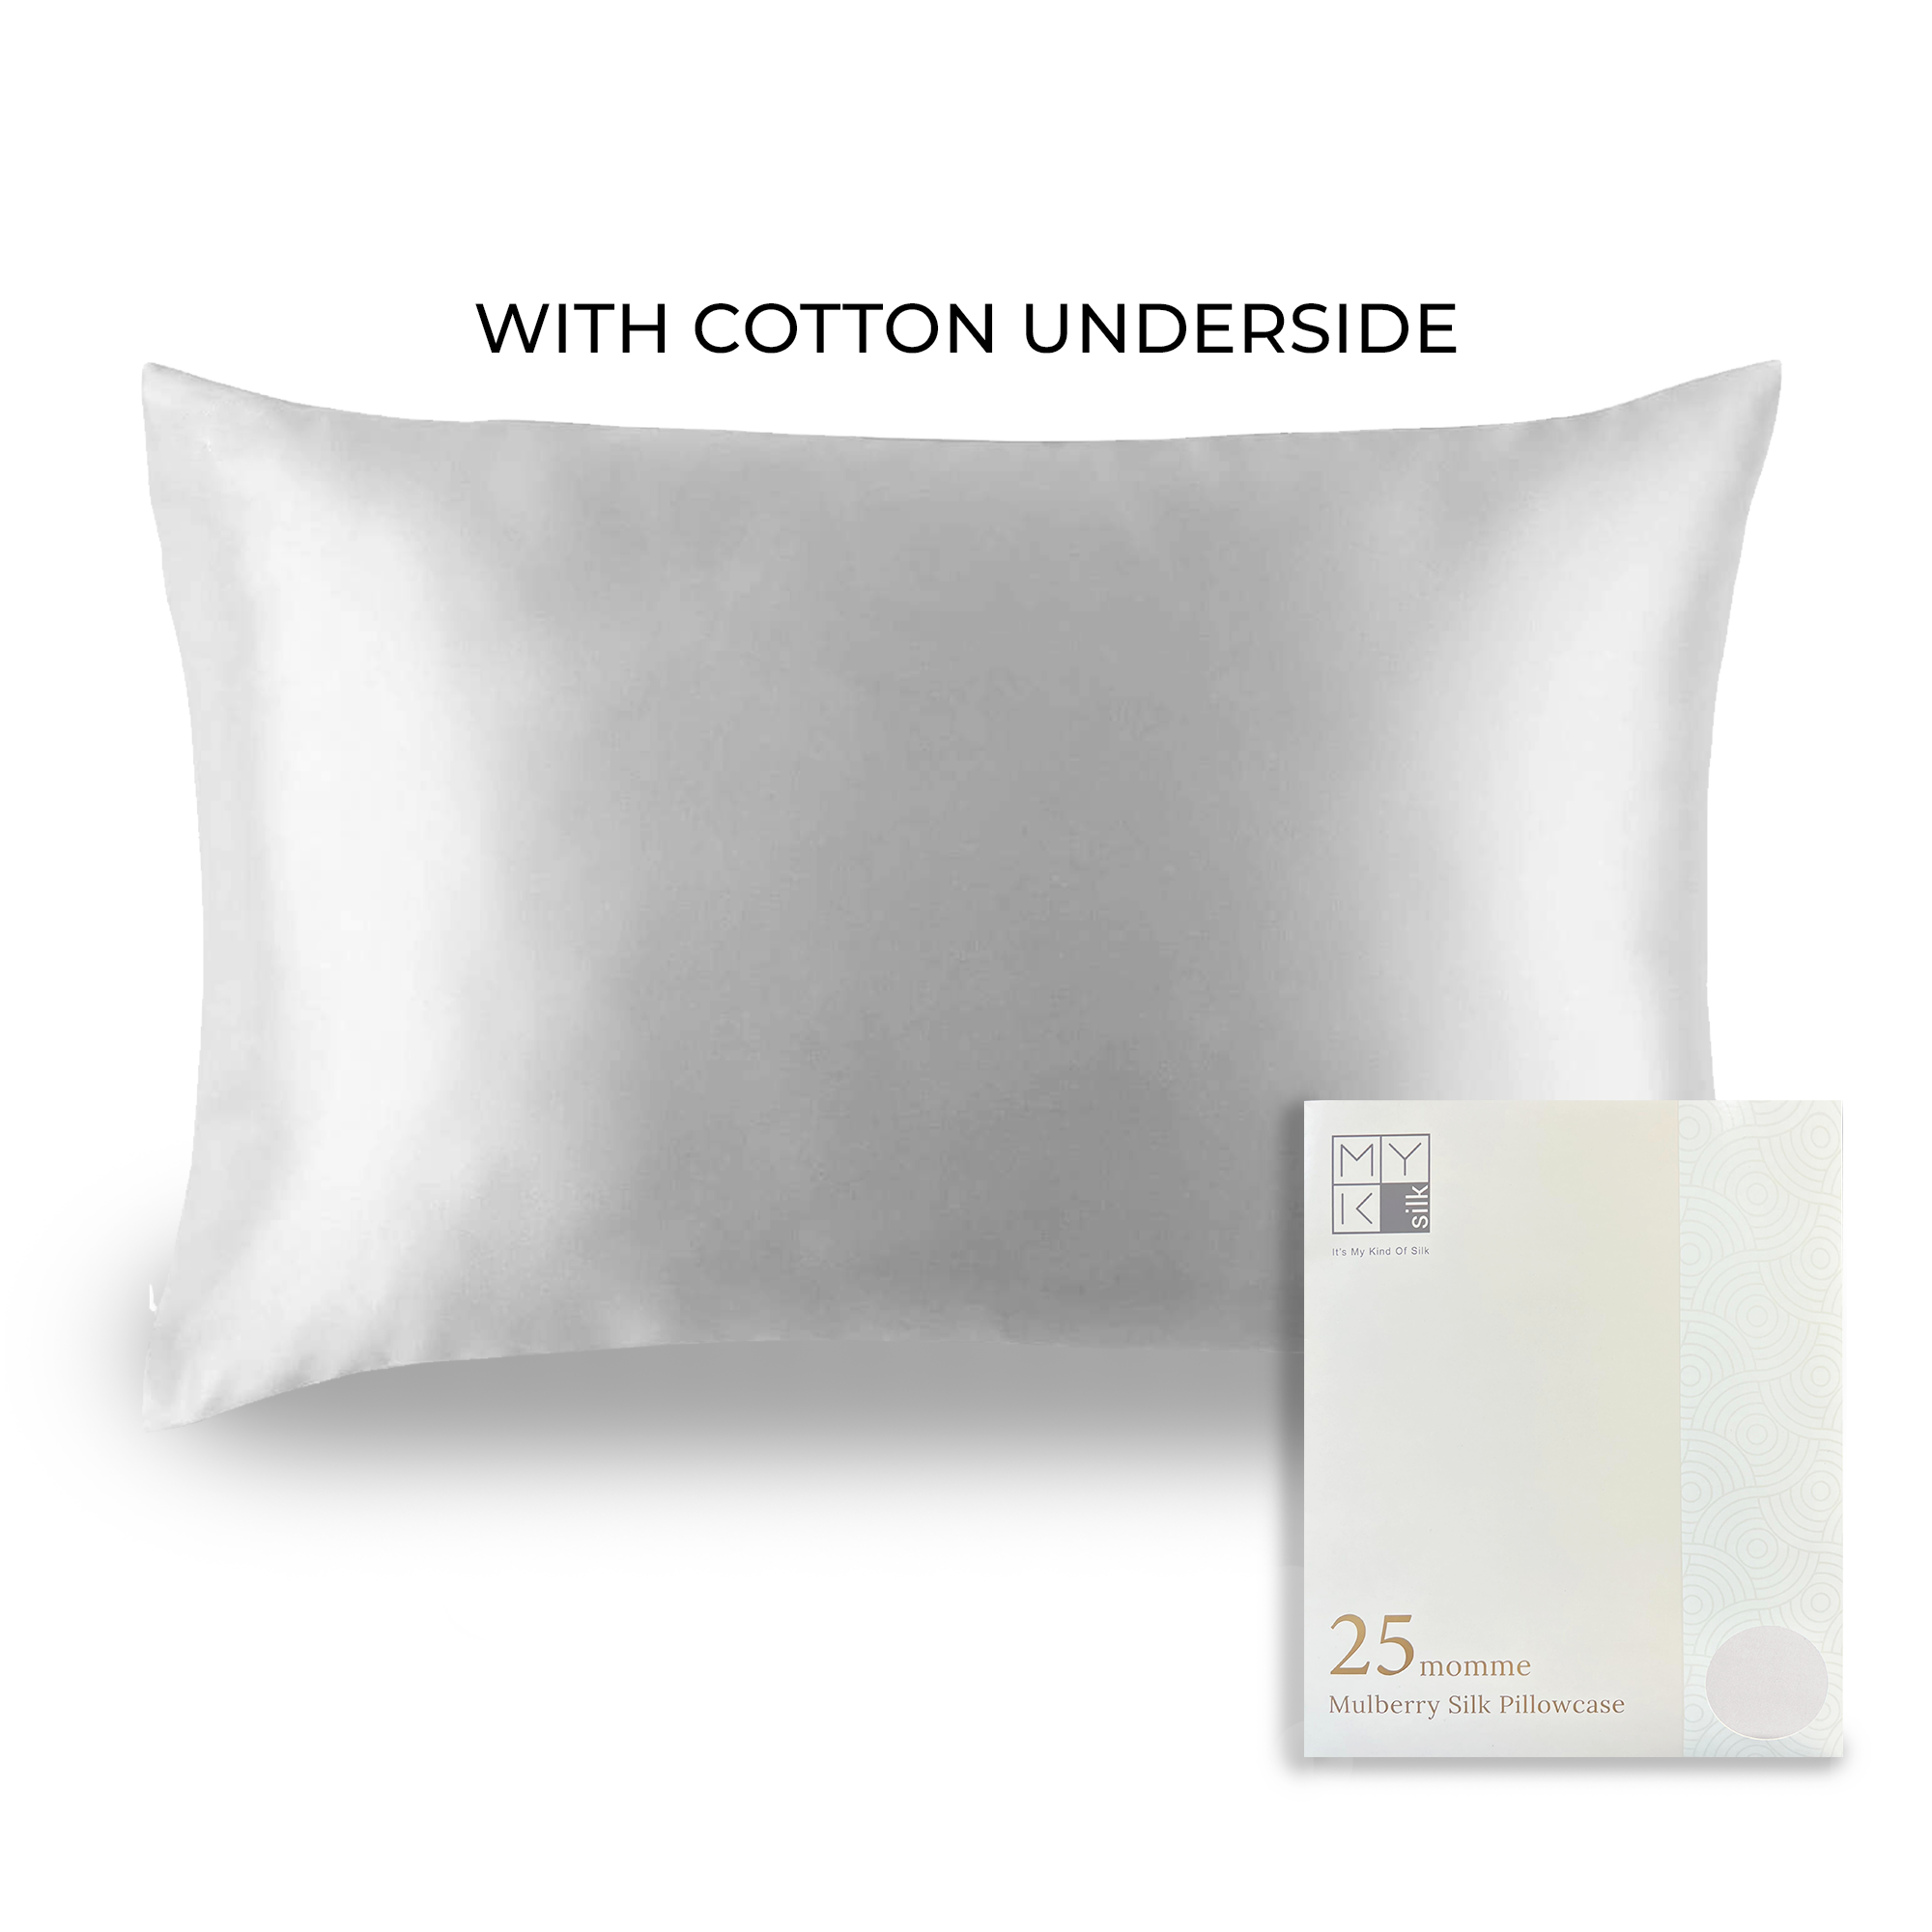 Products Luxury Mulberry Silk Pillowcase with Cotton Underside (25 momme) - MYK Silk #color_french grey